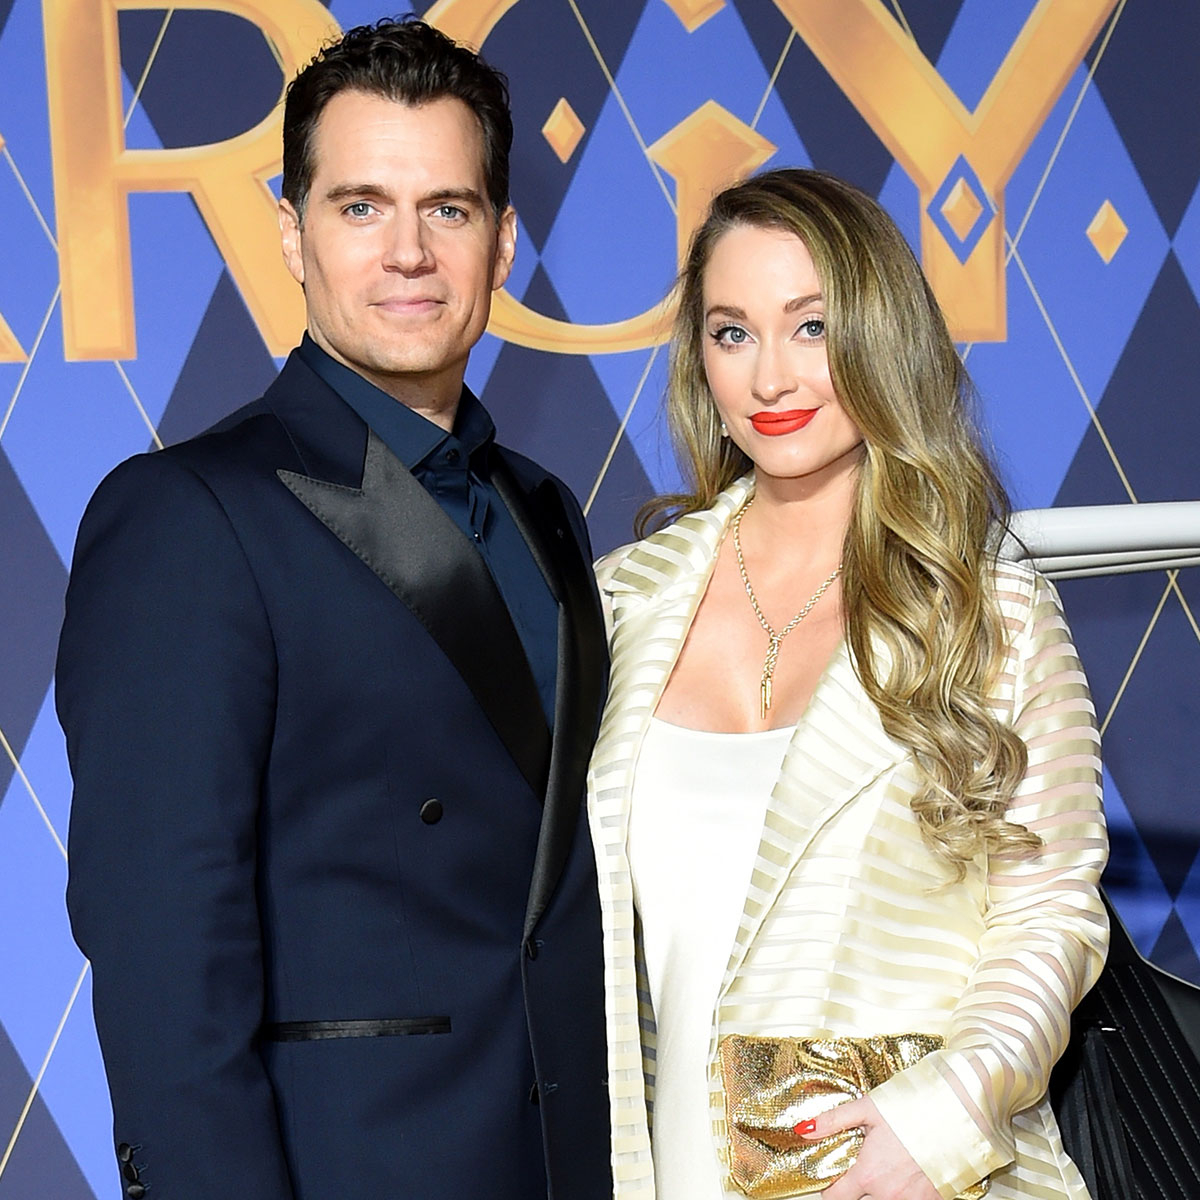 Image for article Henry Cavill Expecting First Baby With Girlfriend Natalie Viscuso  E! NEWS